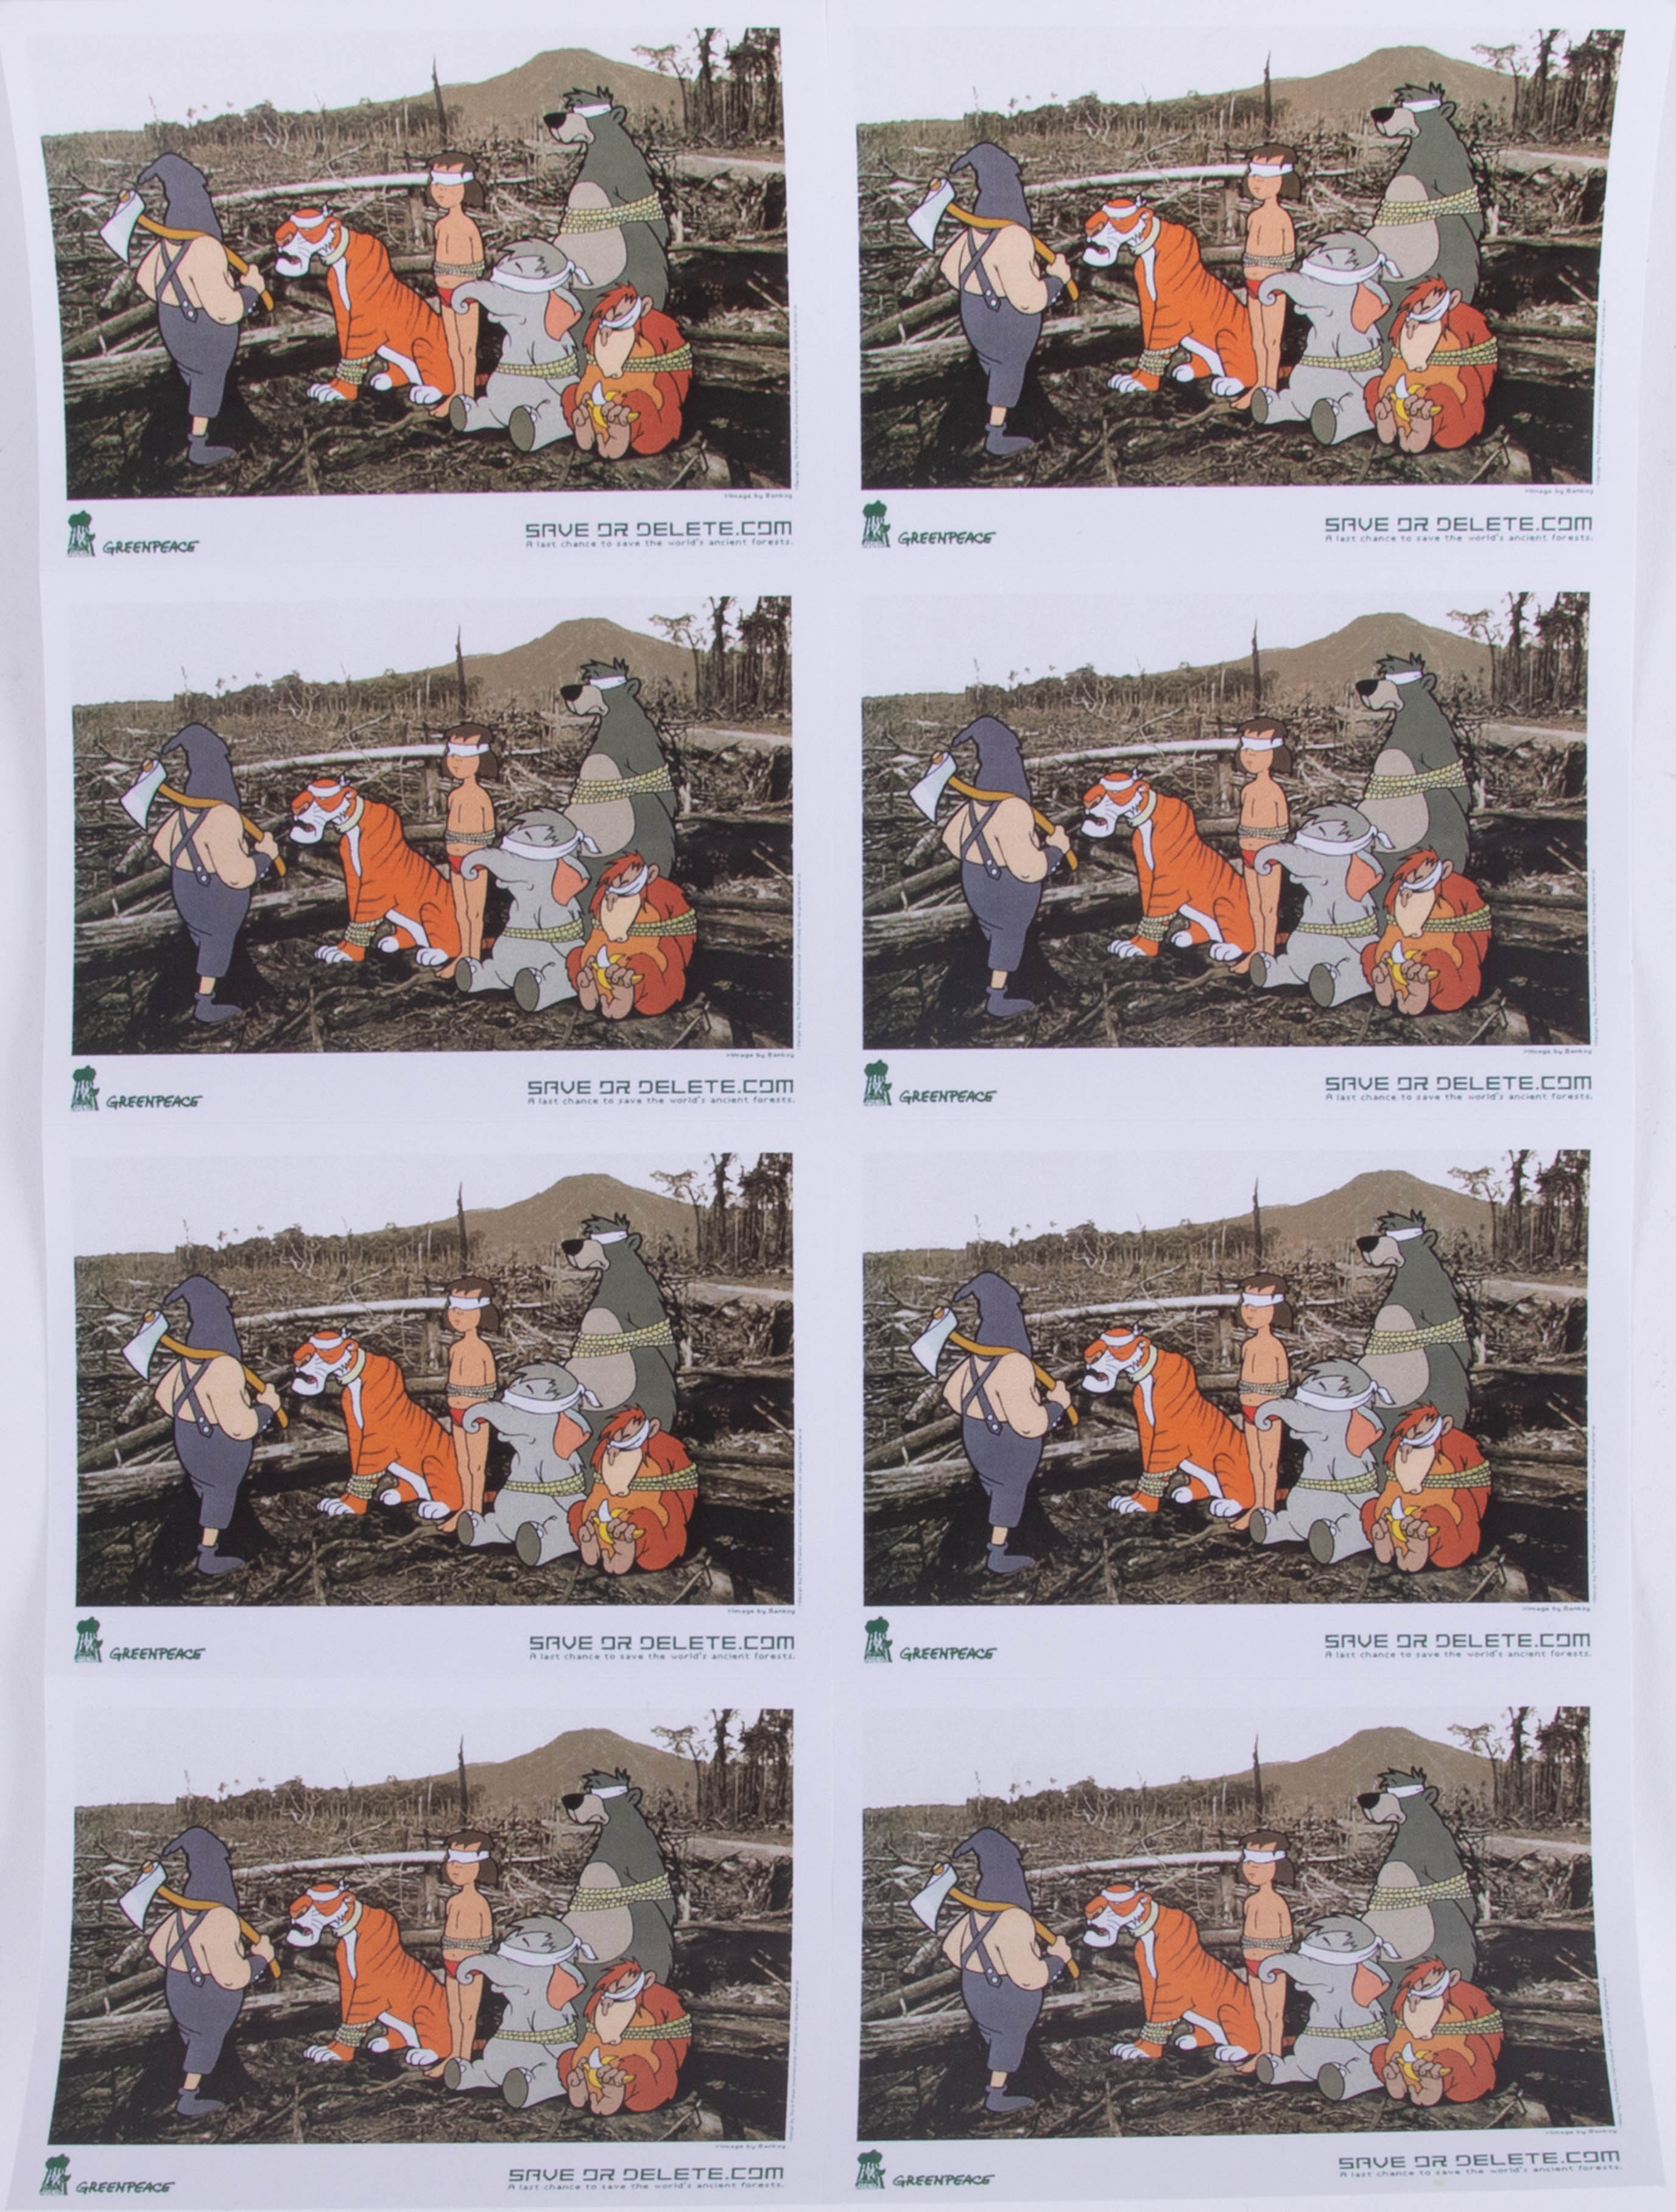 Banksy - Greenpeace Save or Delete Offset lithographic poster print, unframed. 59.5 x 42cm, 2002, - Image 4 of 4